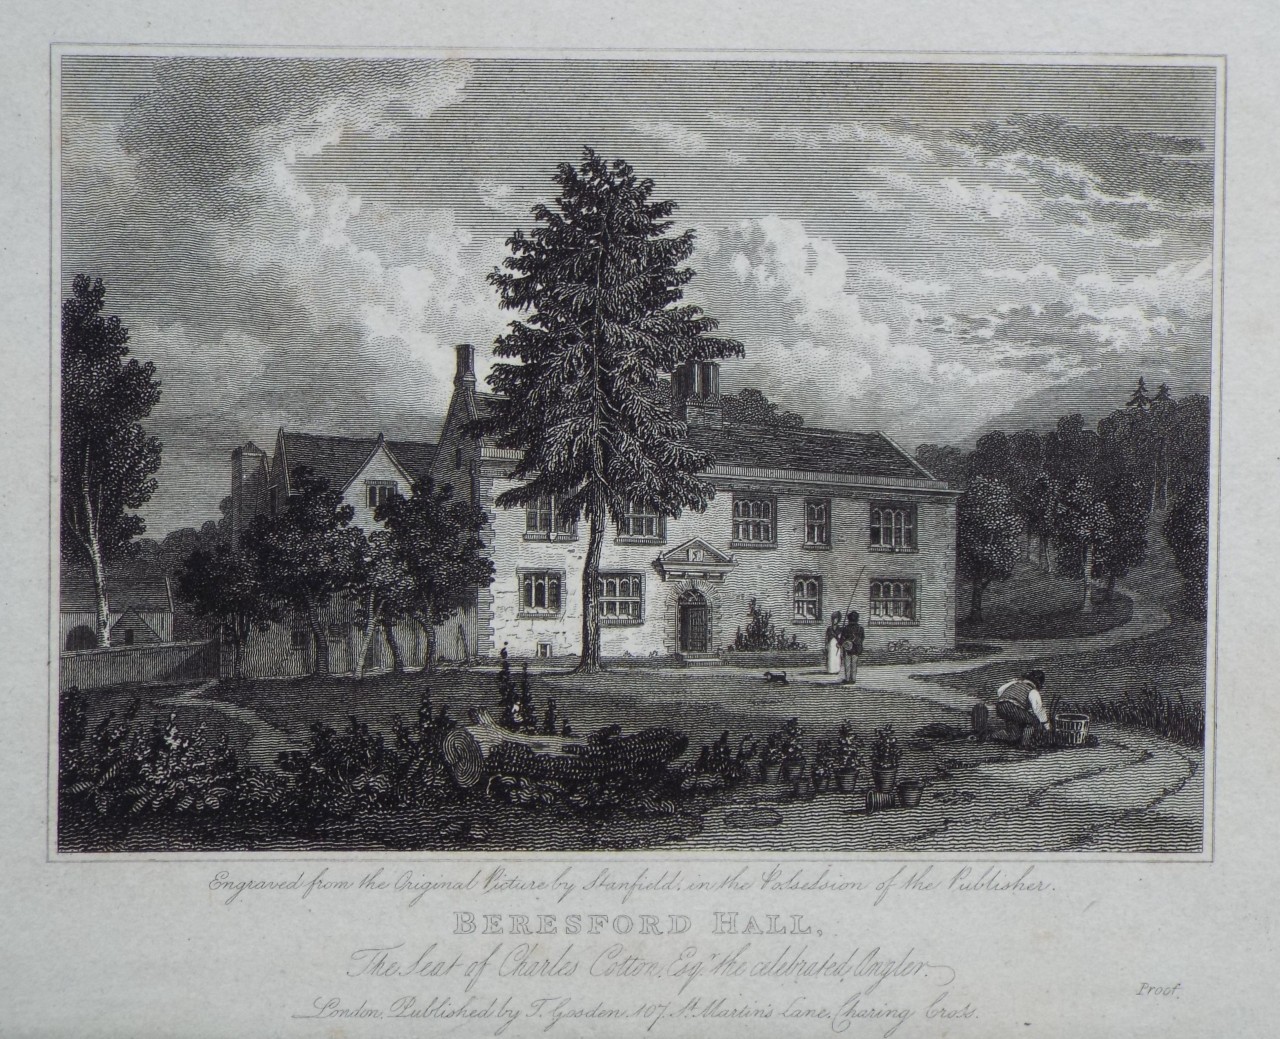 Print - Beresford Hall, The Seat of Charles Cotton Esqr. the celebrated Angler.